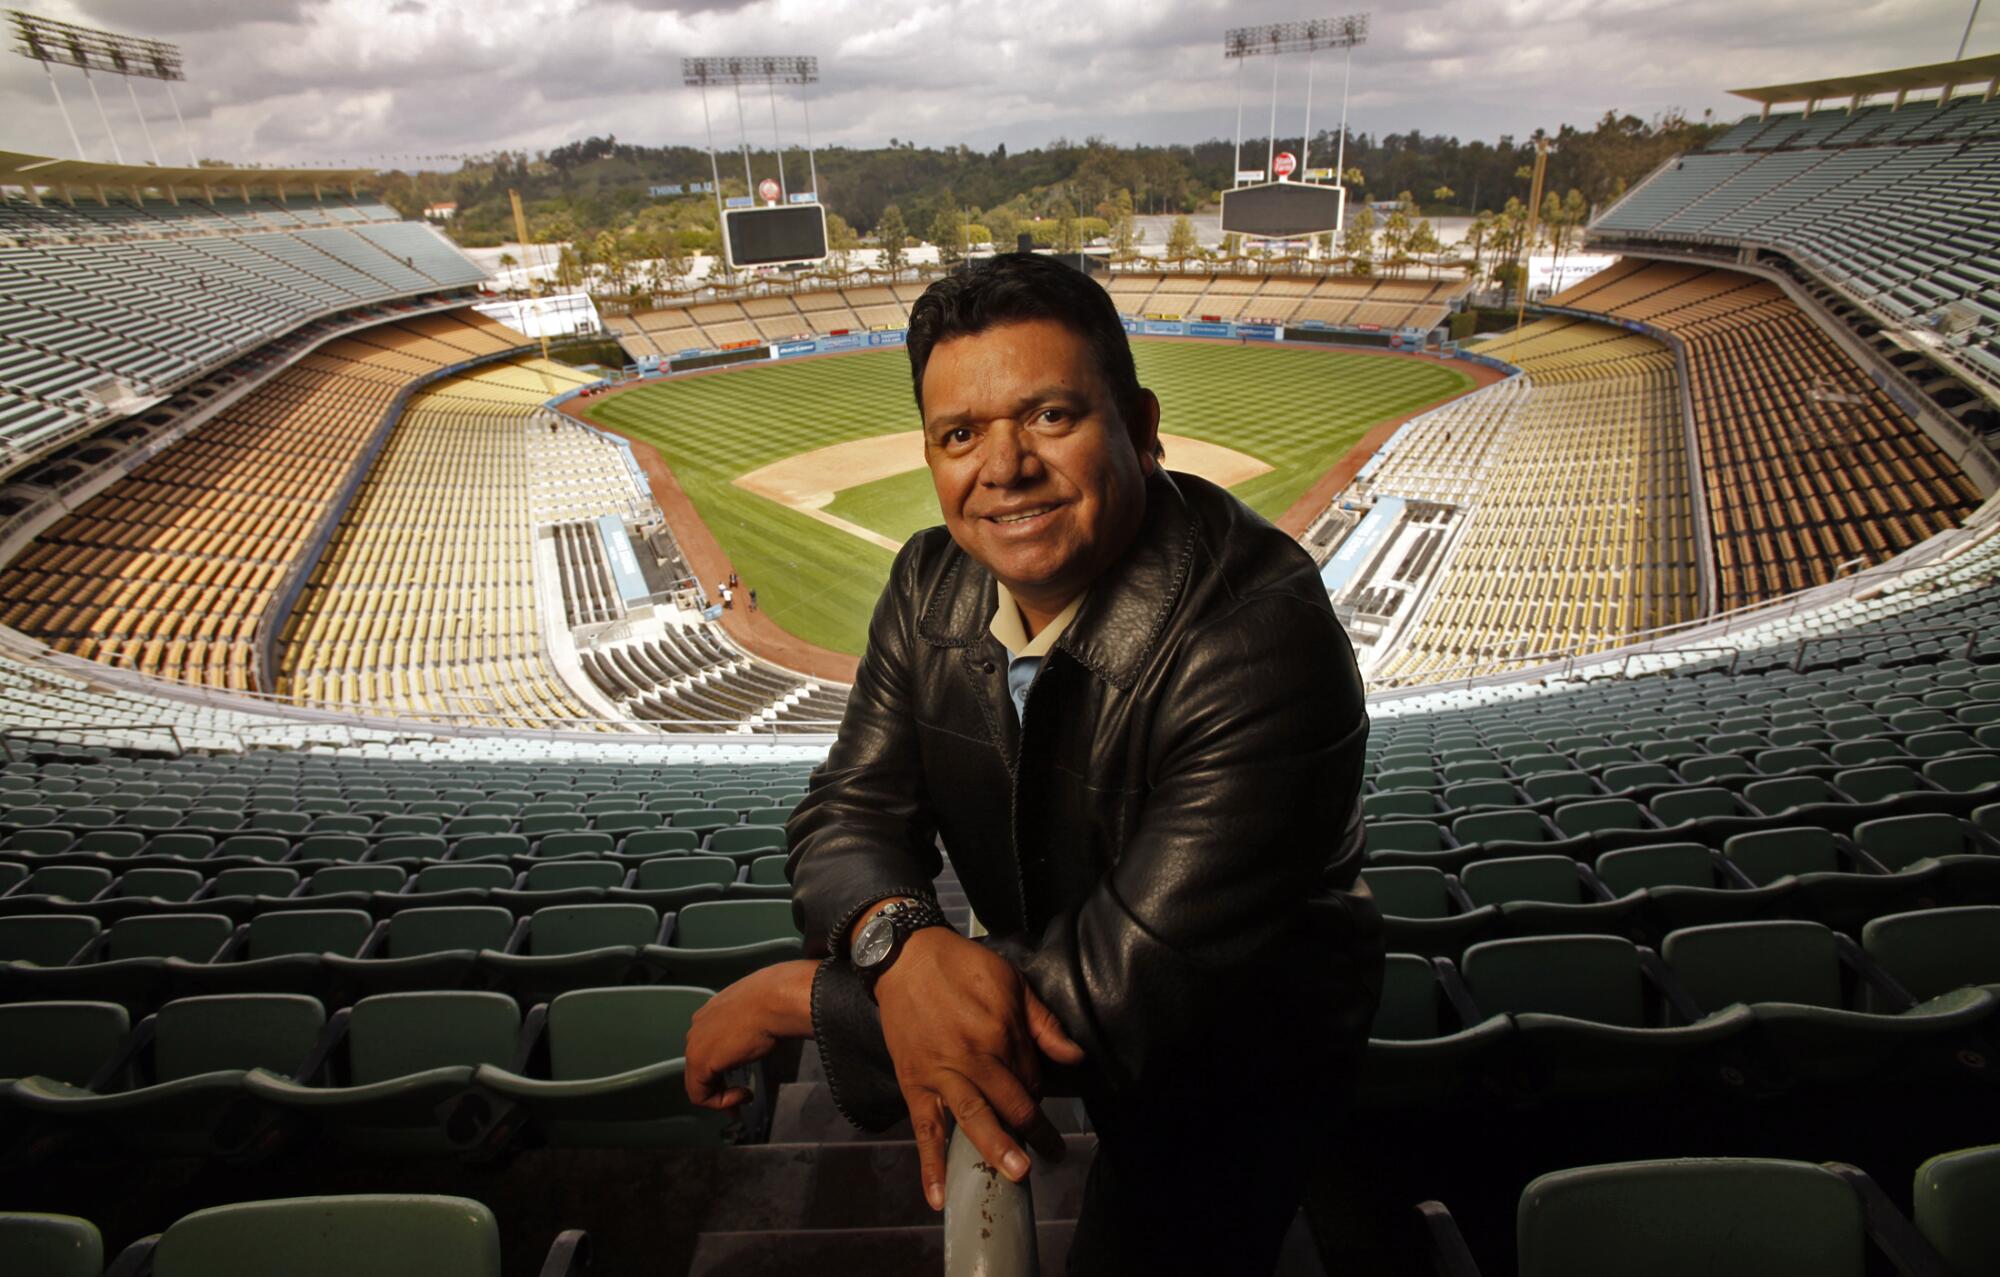 Dodgers Retired Numbers & Bandits: Who Are They Retired For, and